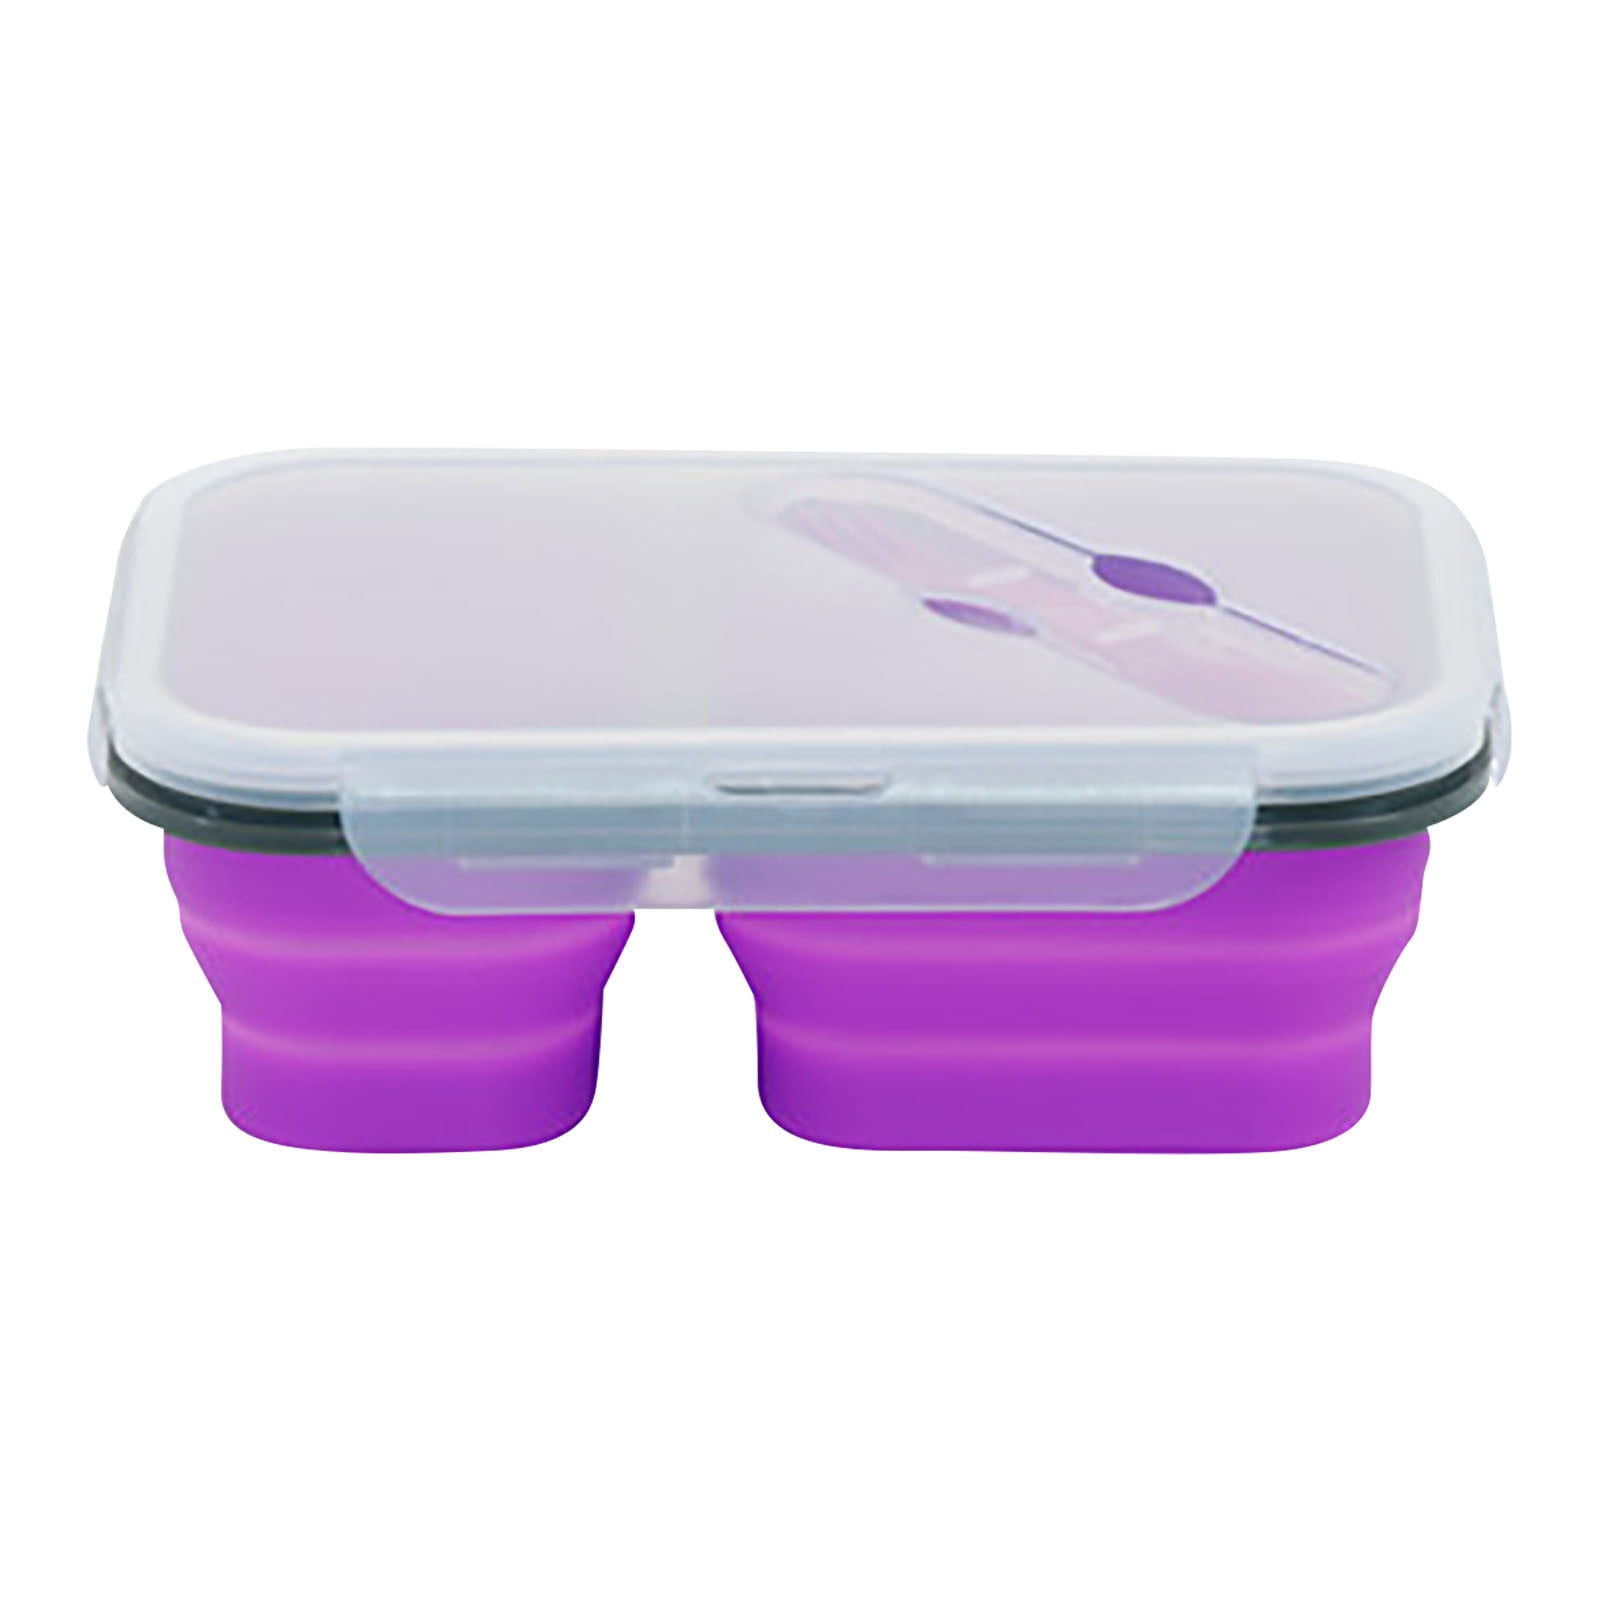 U Konserve Platinum Silicone Nested Duo Food Storage Bento Box Dual Seal Container – Two Pack - Leak Proof, Shatter Proof, Dishwasher Safe, Plastic